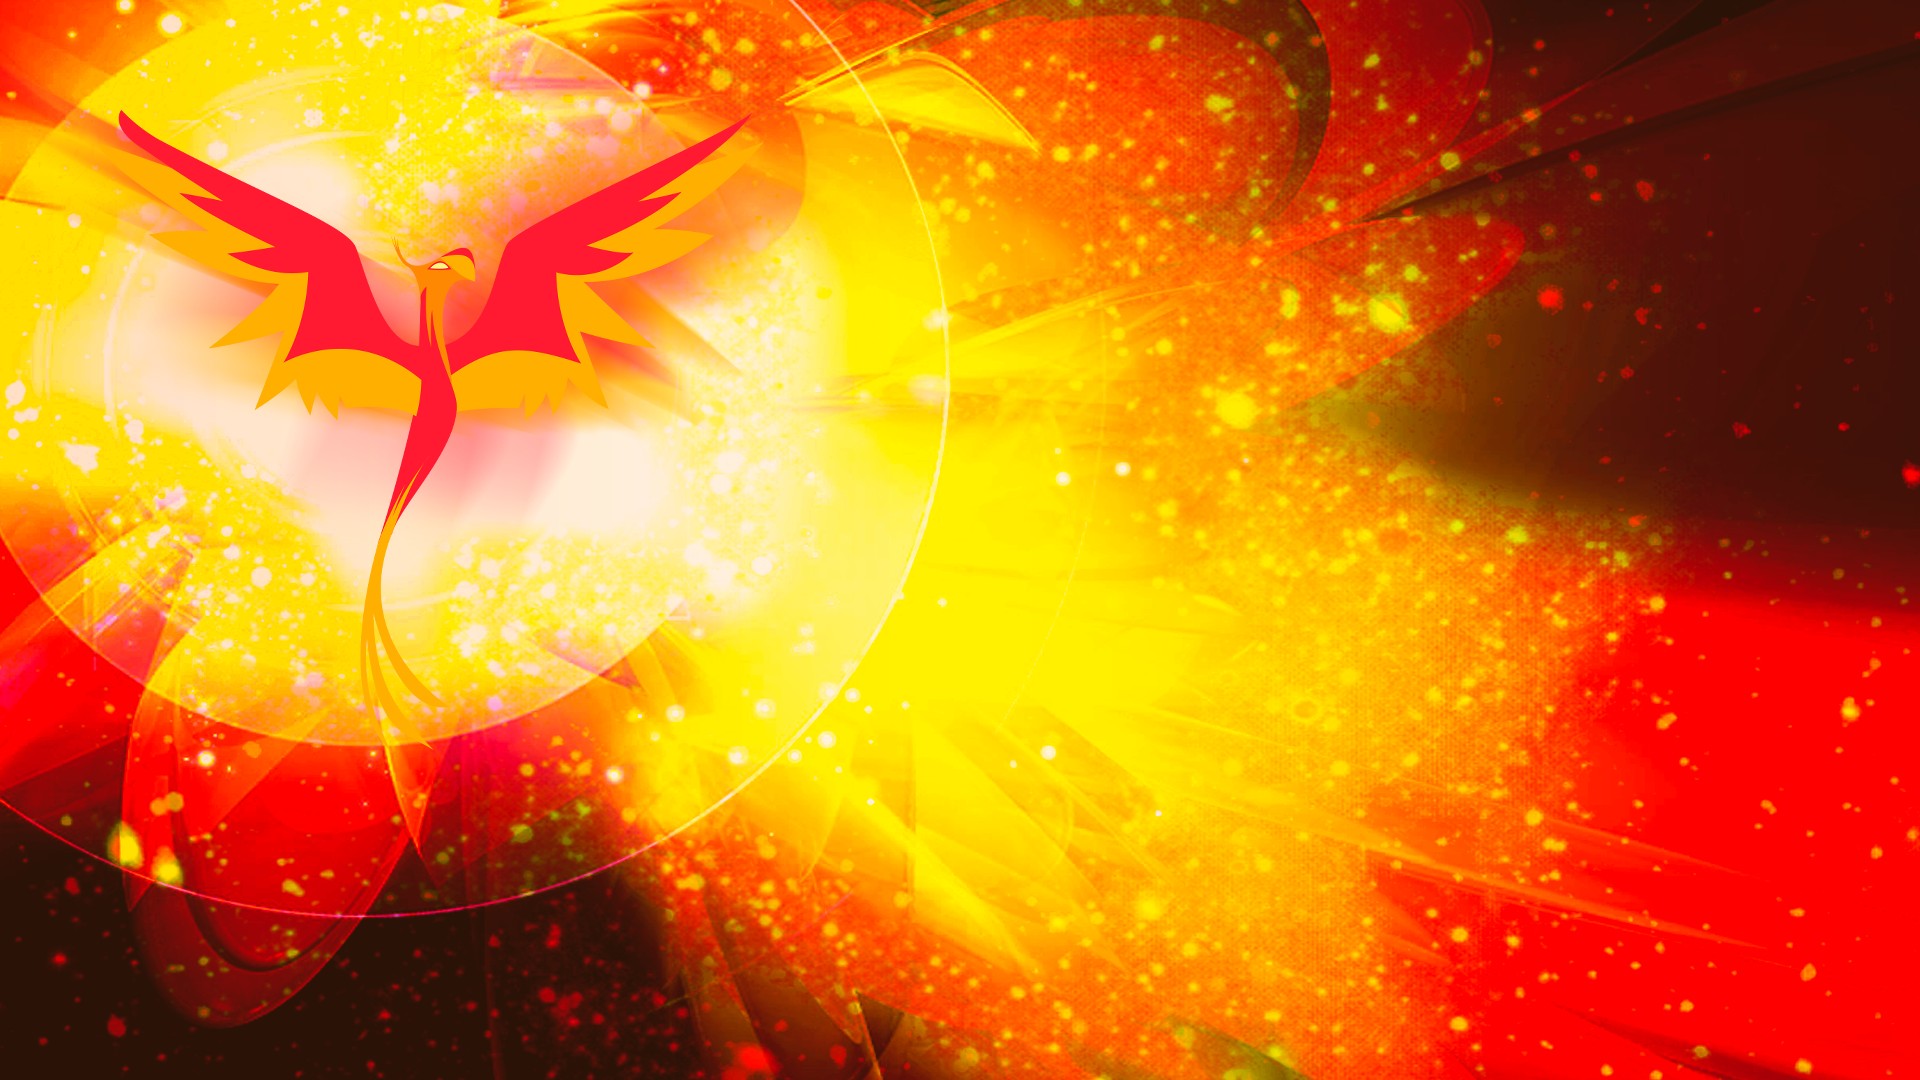 HD Phoenix Bird Backgrounds with resolution 1920X1080 pixel. You can use this wallpaper as background for your desktop Computer Screensavers, Android or iPhone smartphones